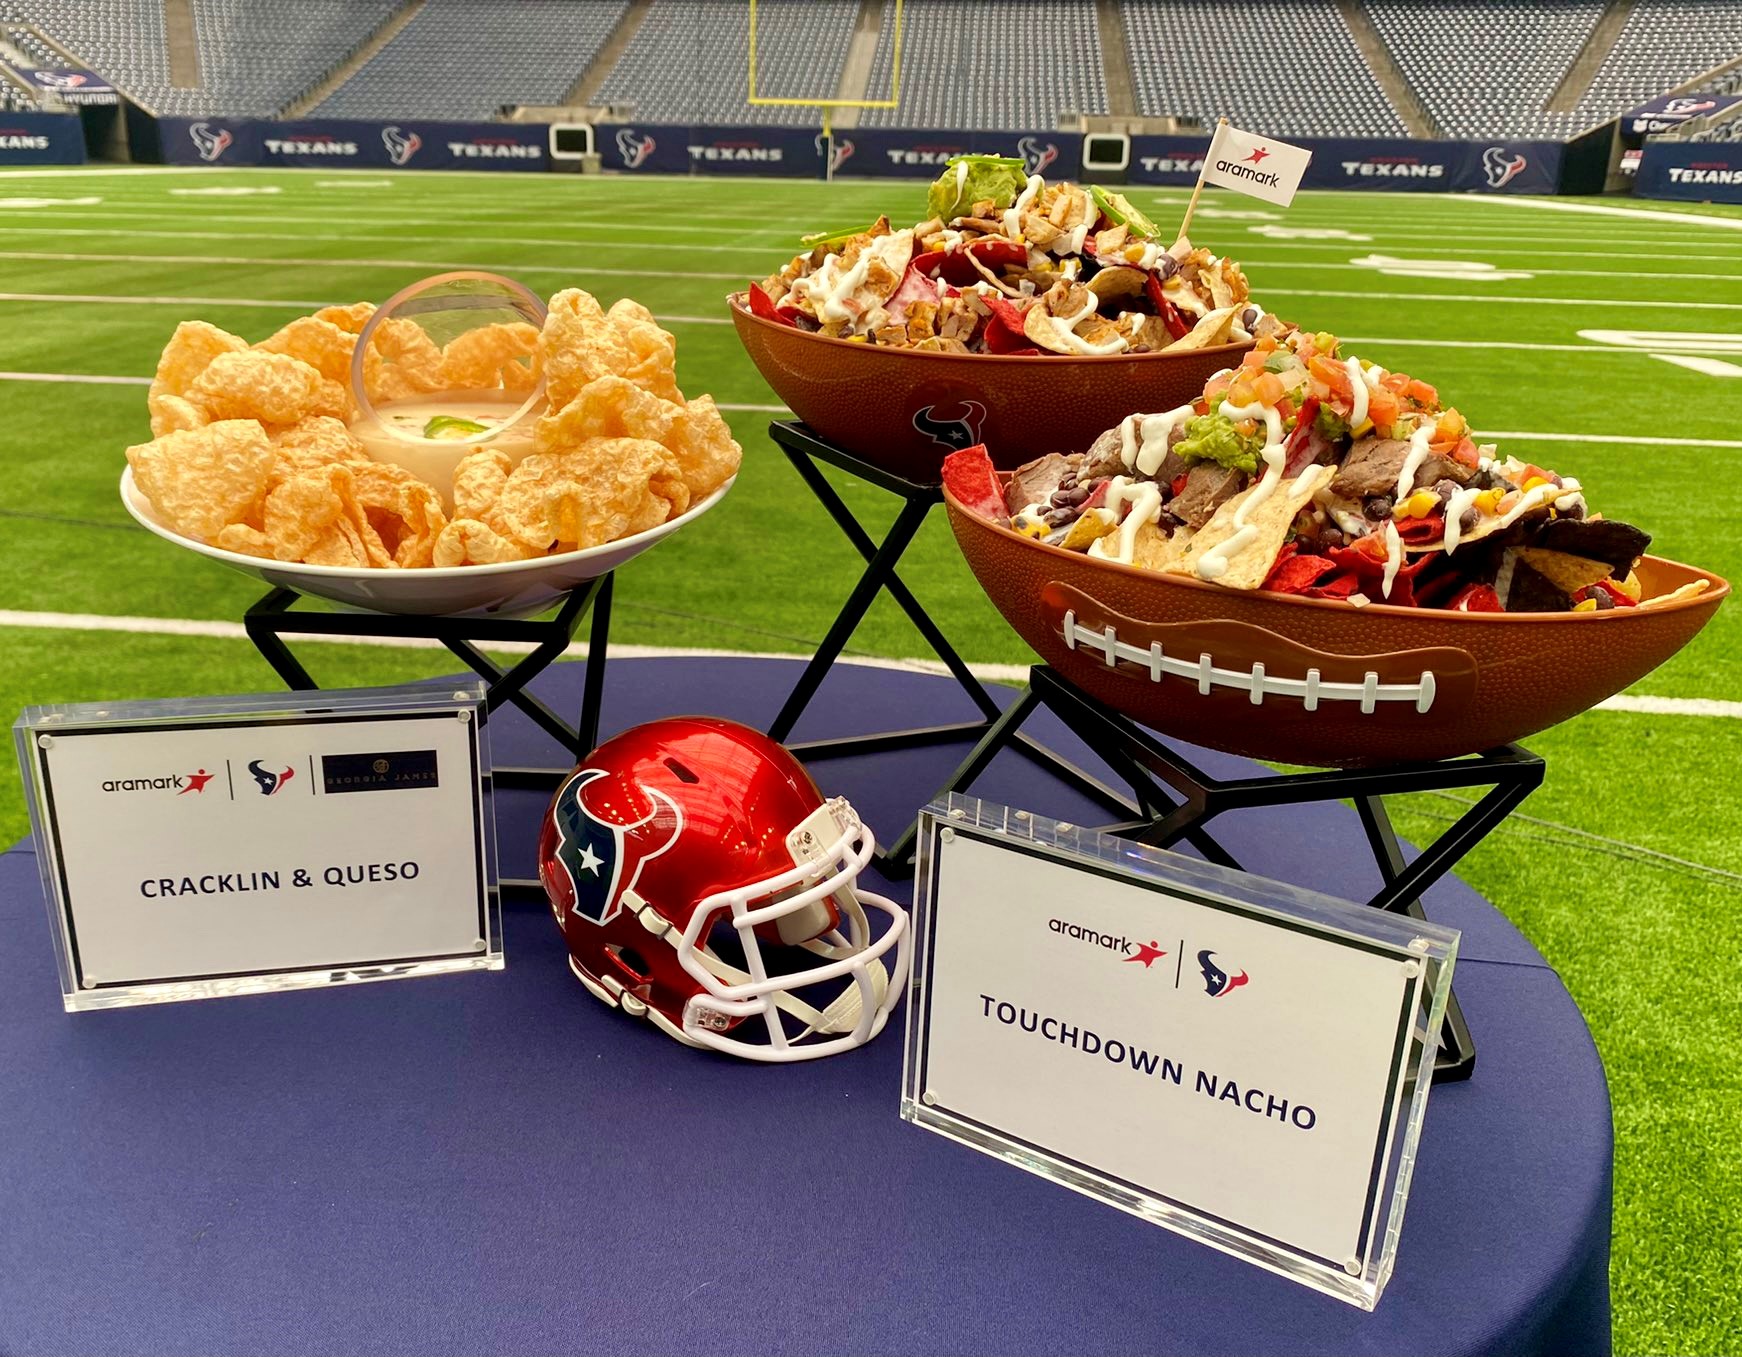 Texans' new concessions stand snacks include cracklins and queso